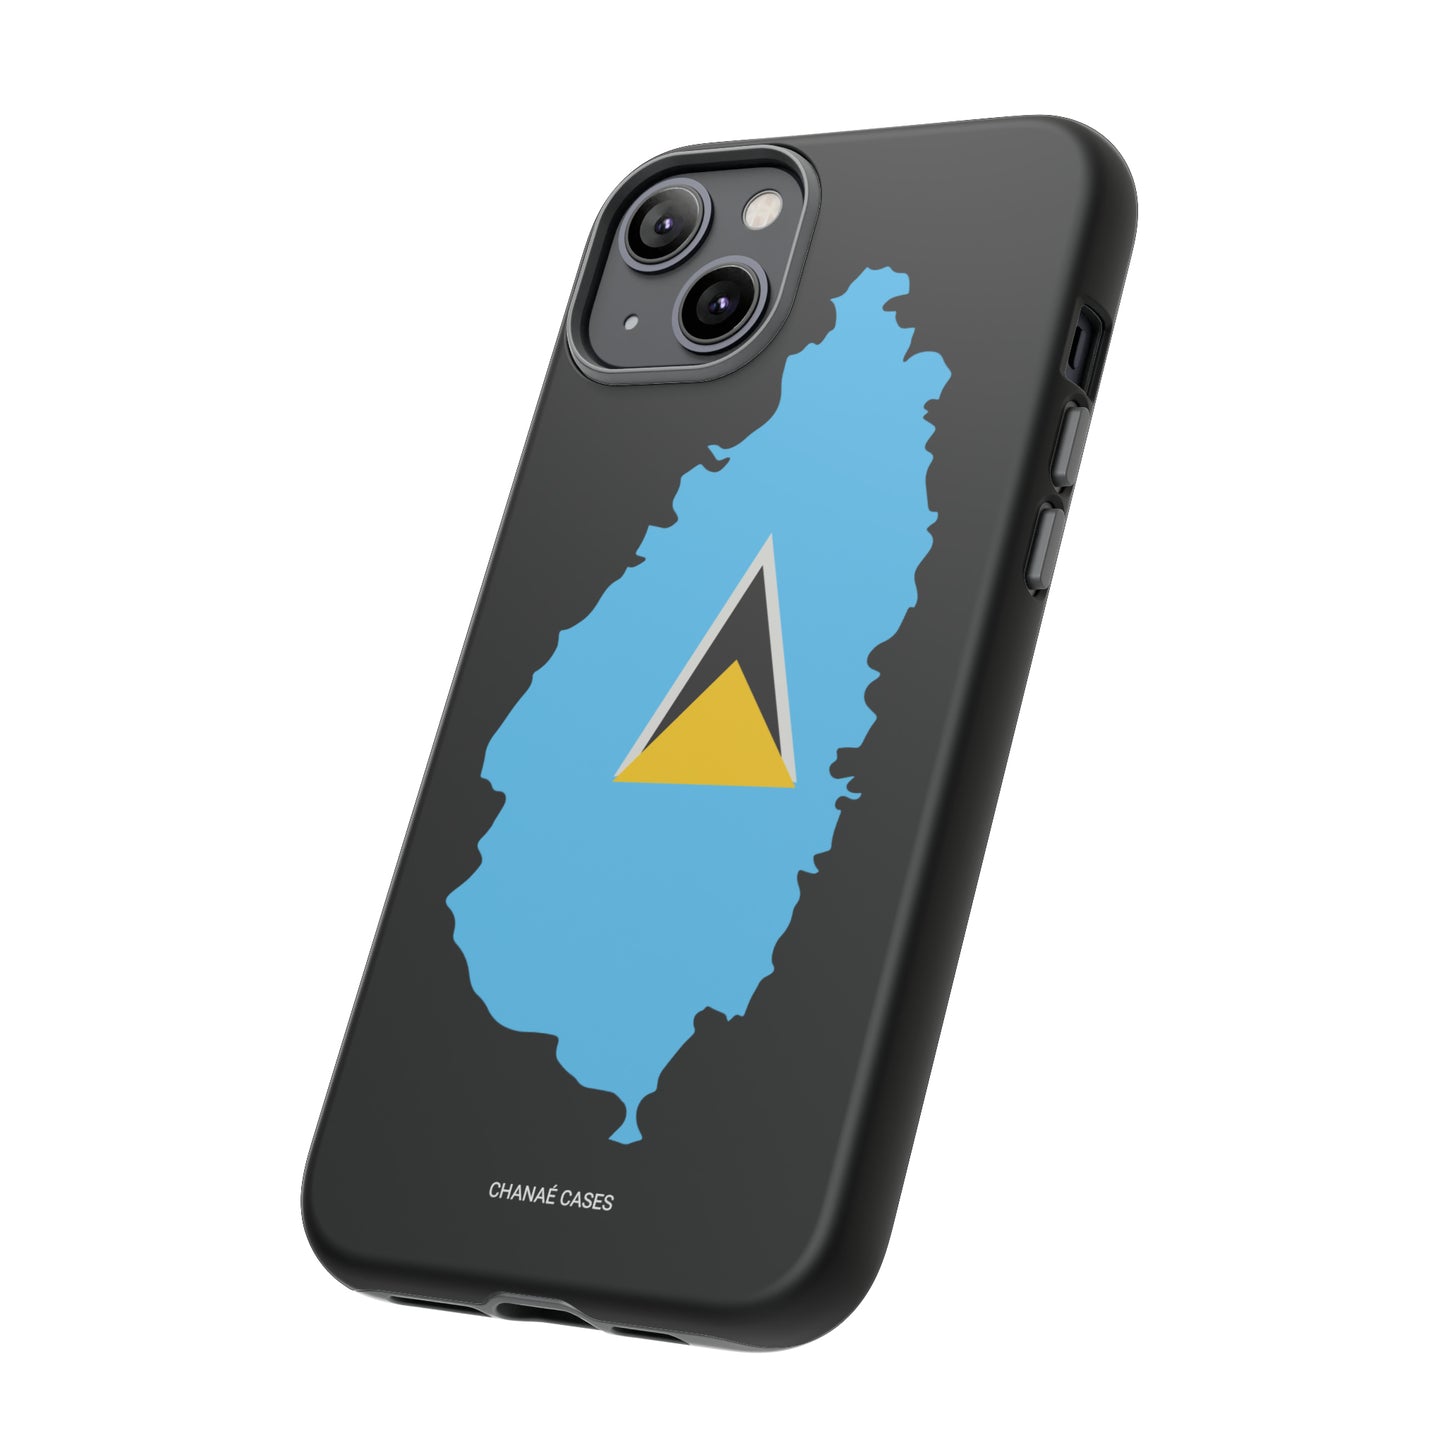 Your Country's Map or Flag iPhone "Tough" Case (Black) - Customisable